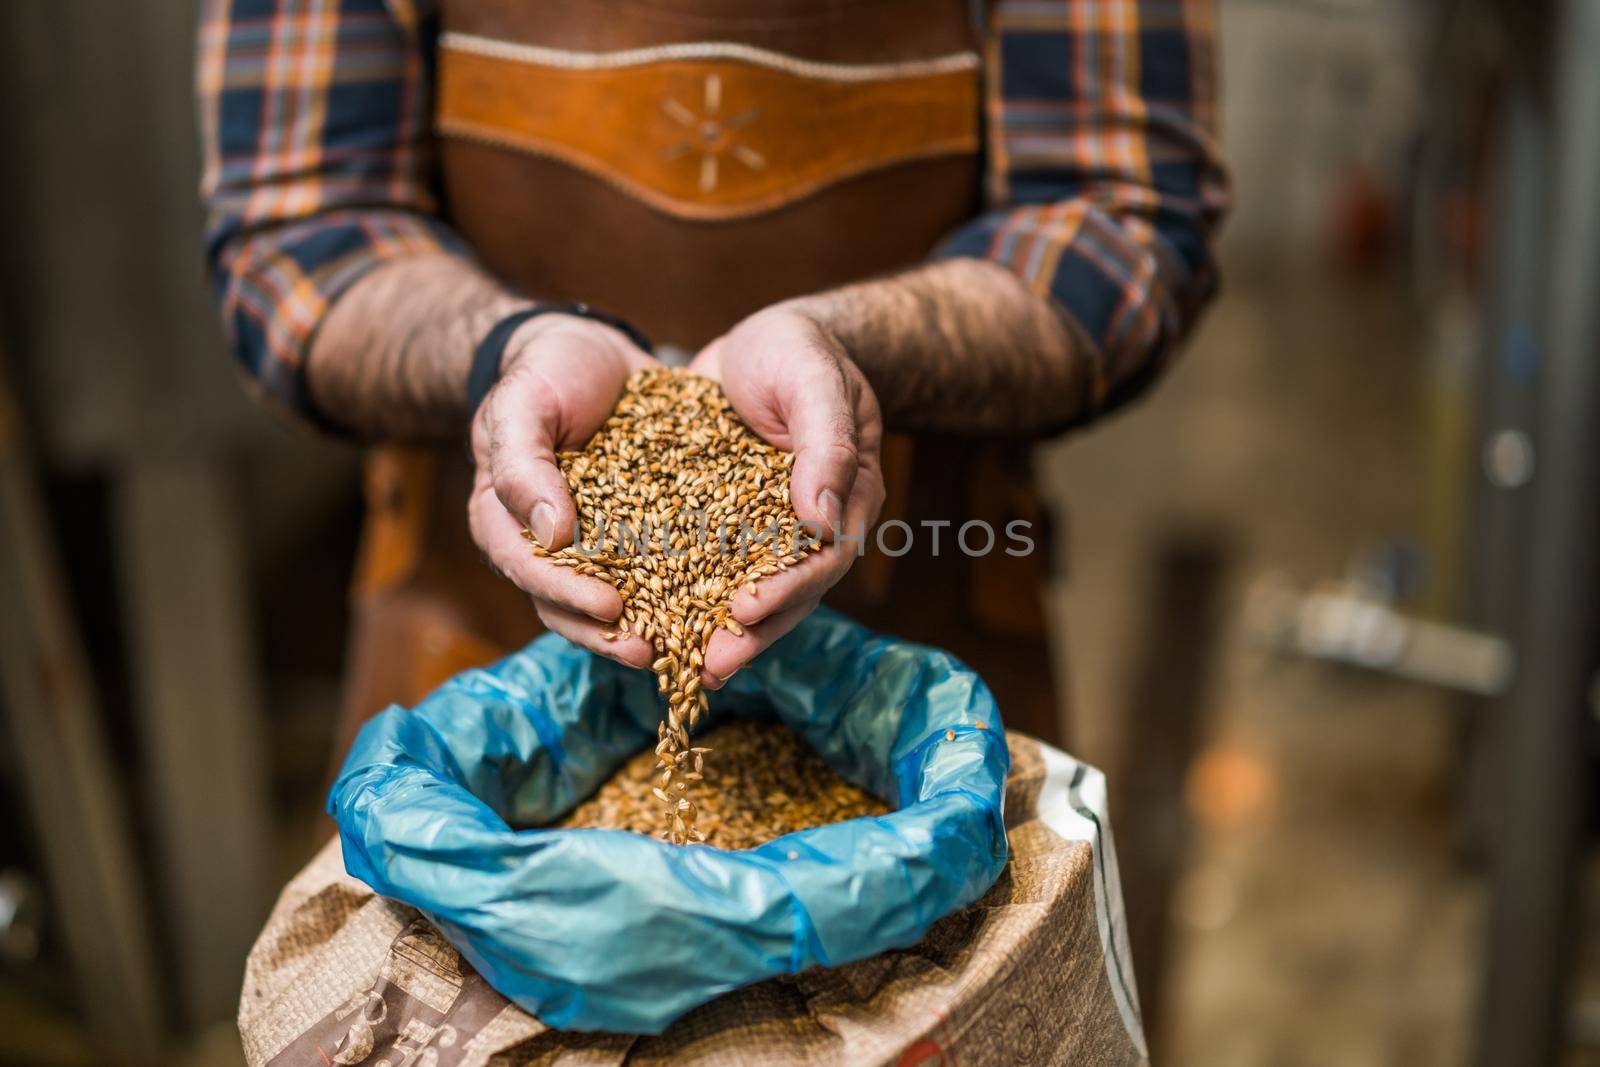 Master brewer examining the barley seeds before they enter production. Brewery technician with bag of barley in front.